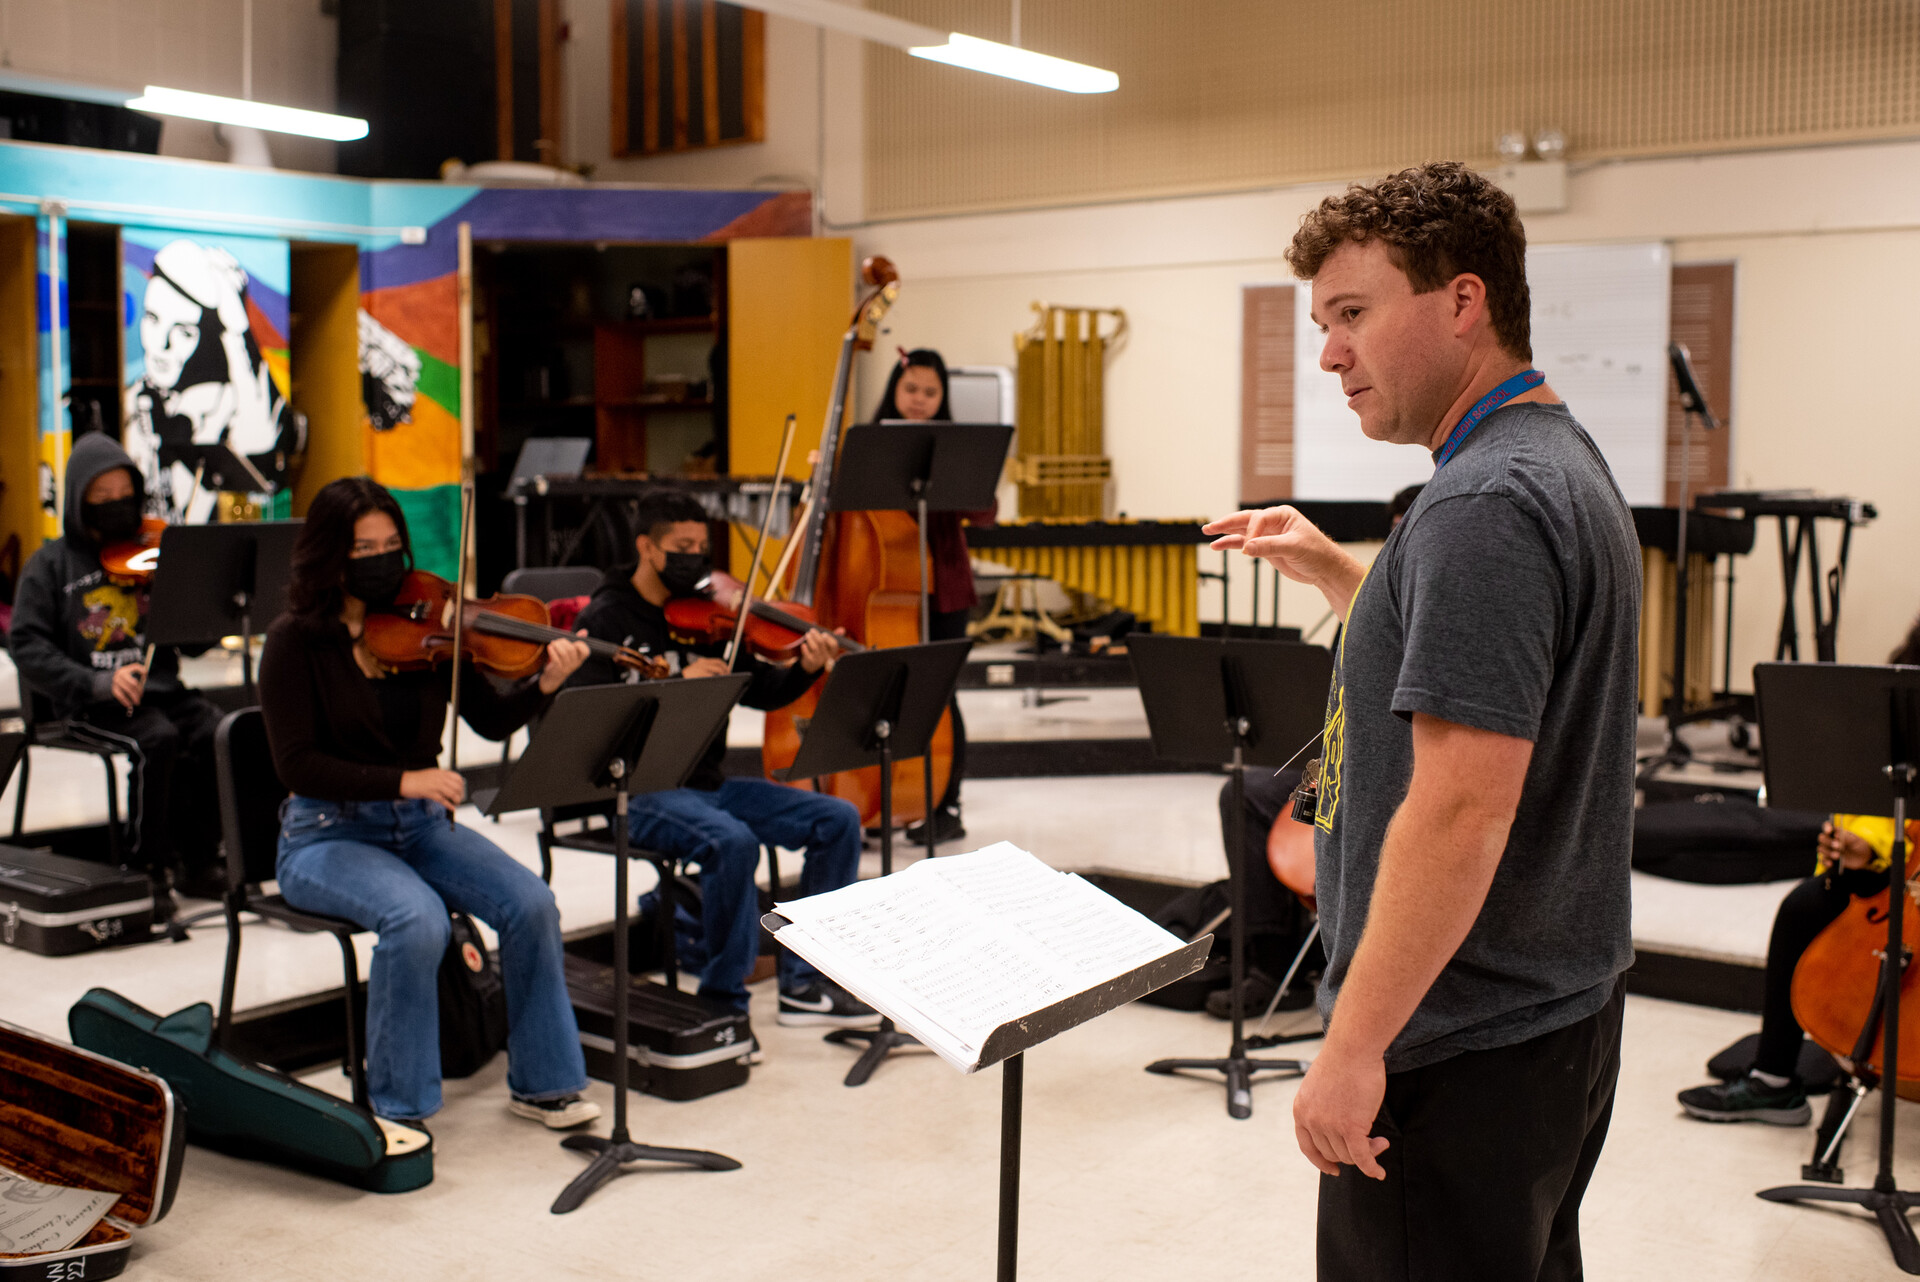 A white music teacher in his 30s teaches a small orchestra of kids playing various instruments in a high school music classroom.